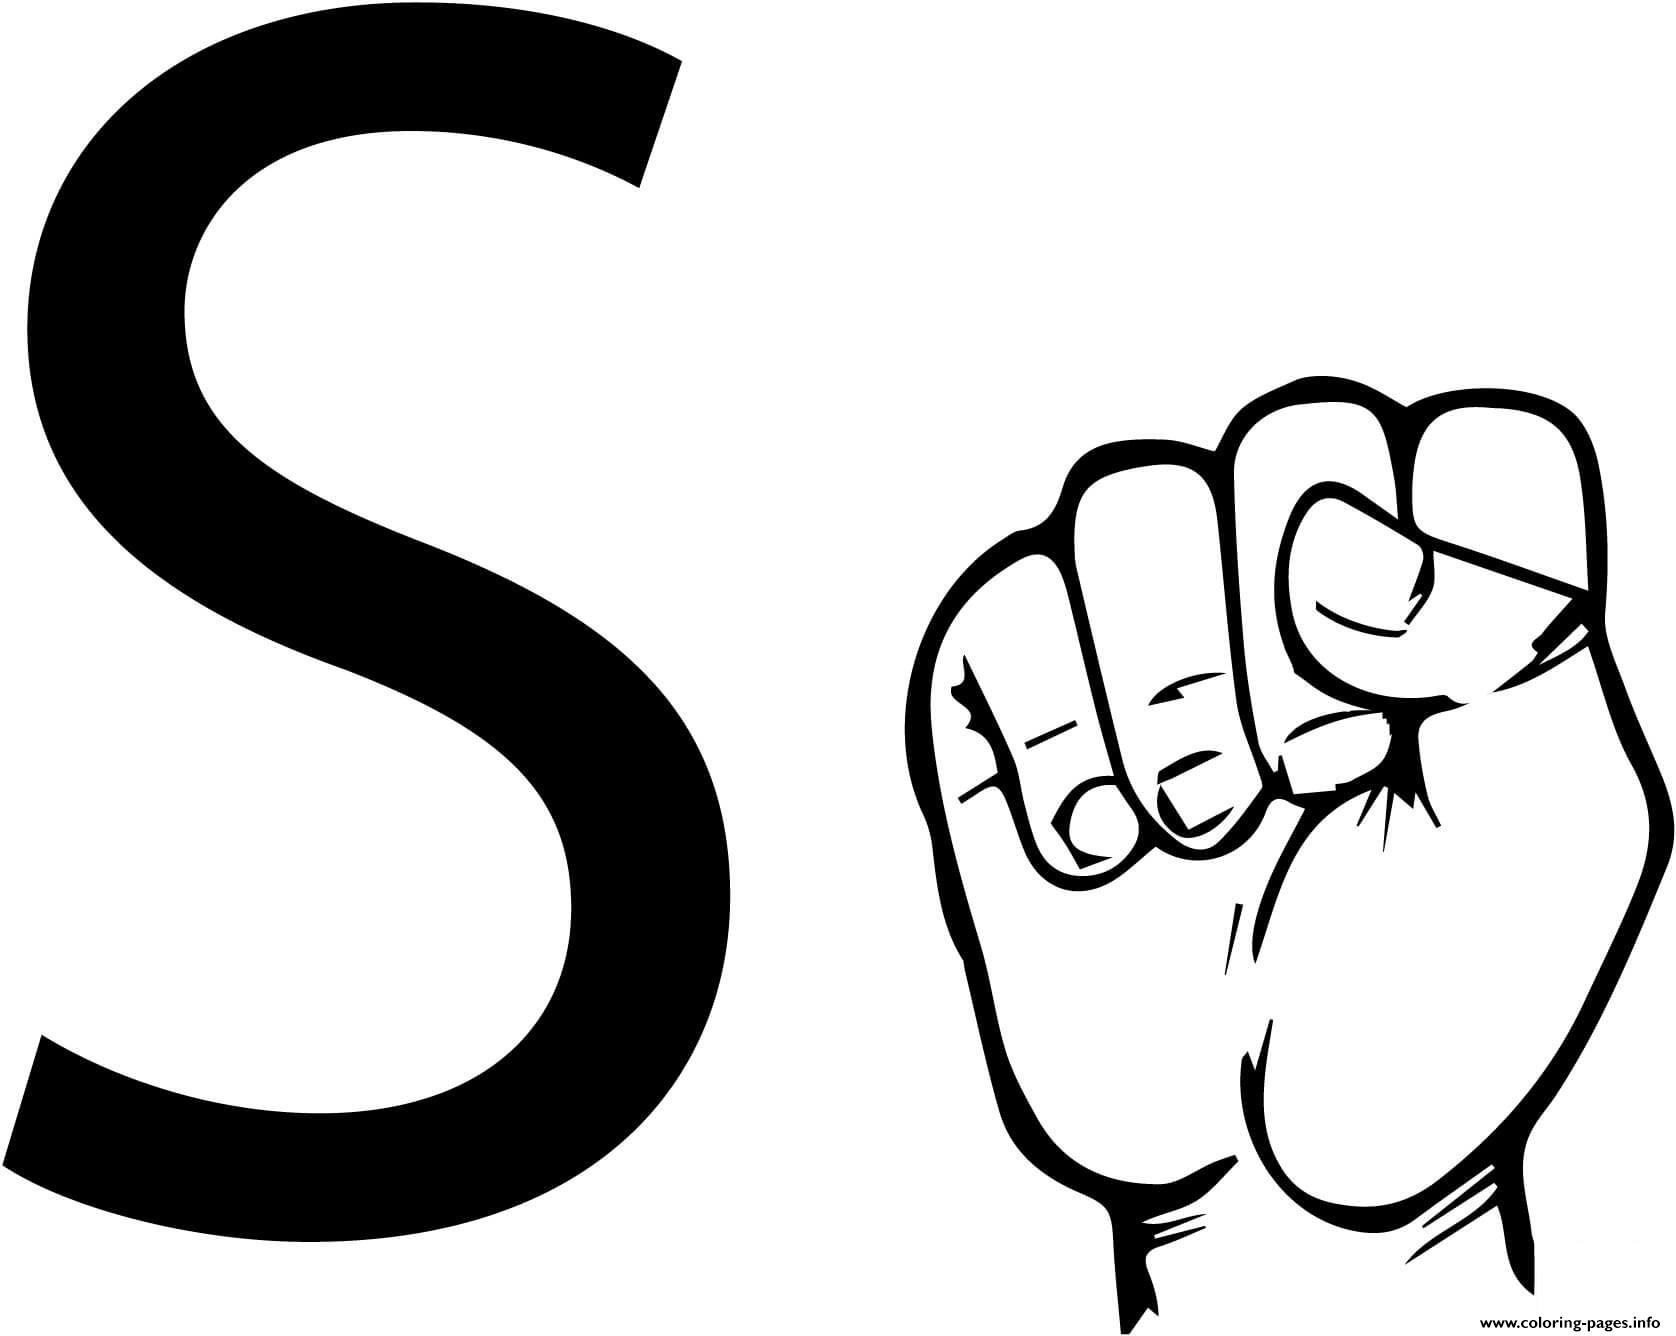 sign-language-coloring-pages-images-and-photos-finder